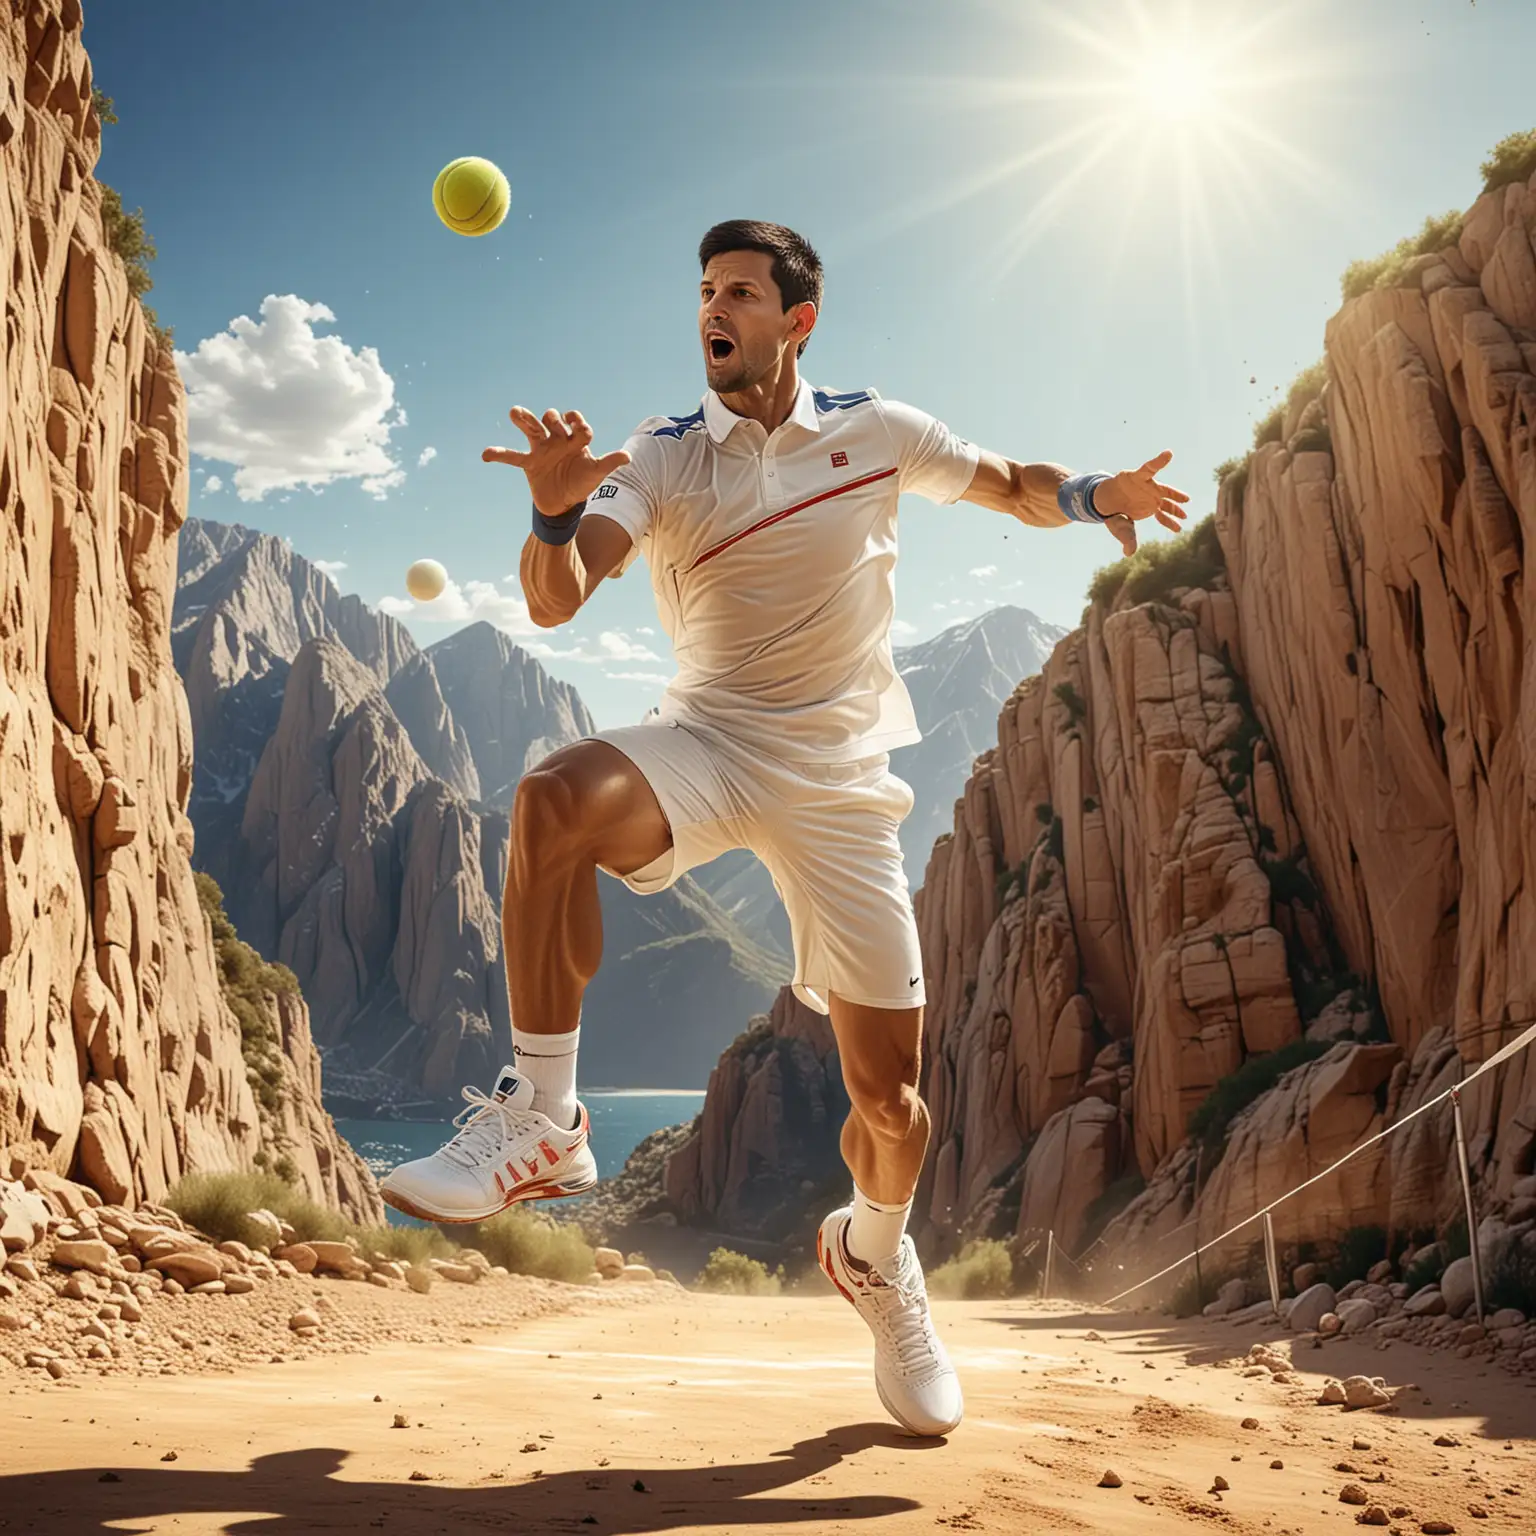 High Detailed Image of Tennis Player Djokovic Jumping off a Cliff to Hit a Tennis Ball on a Sunny Day